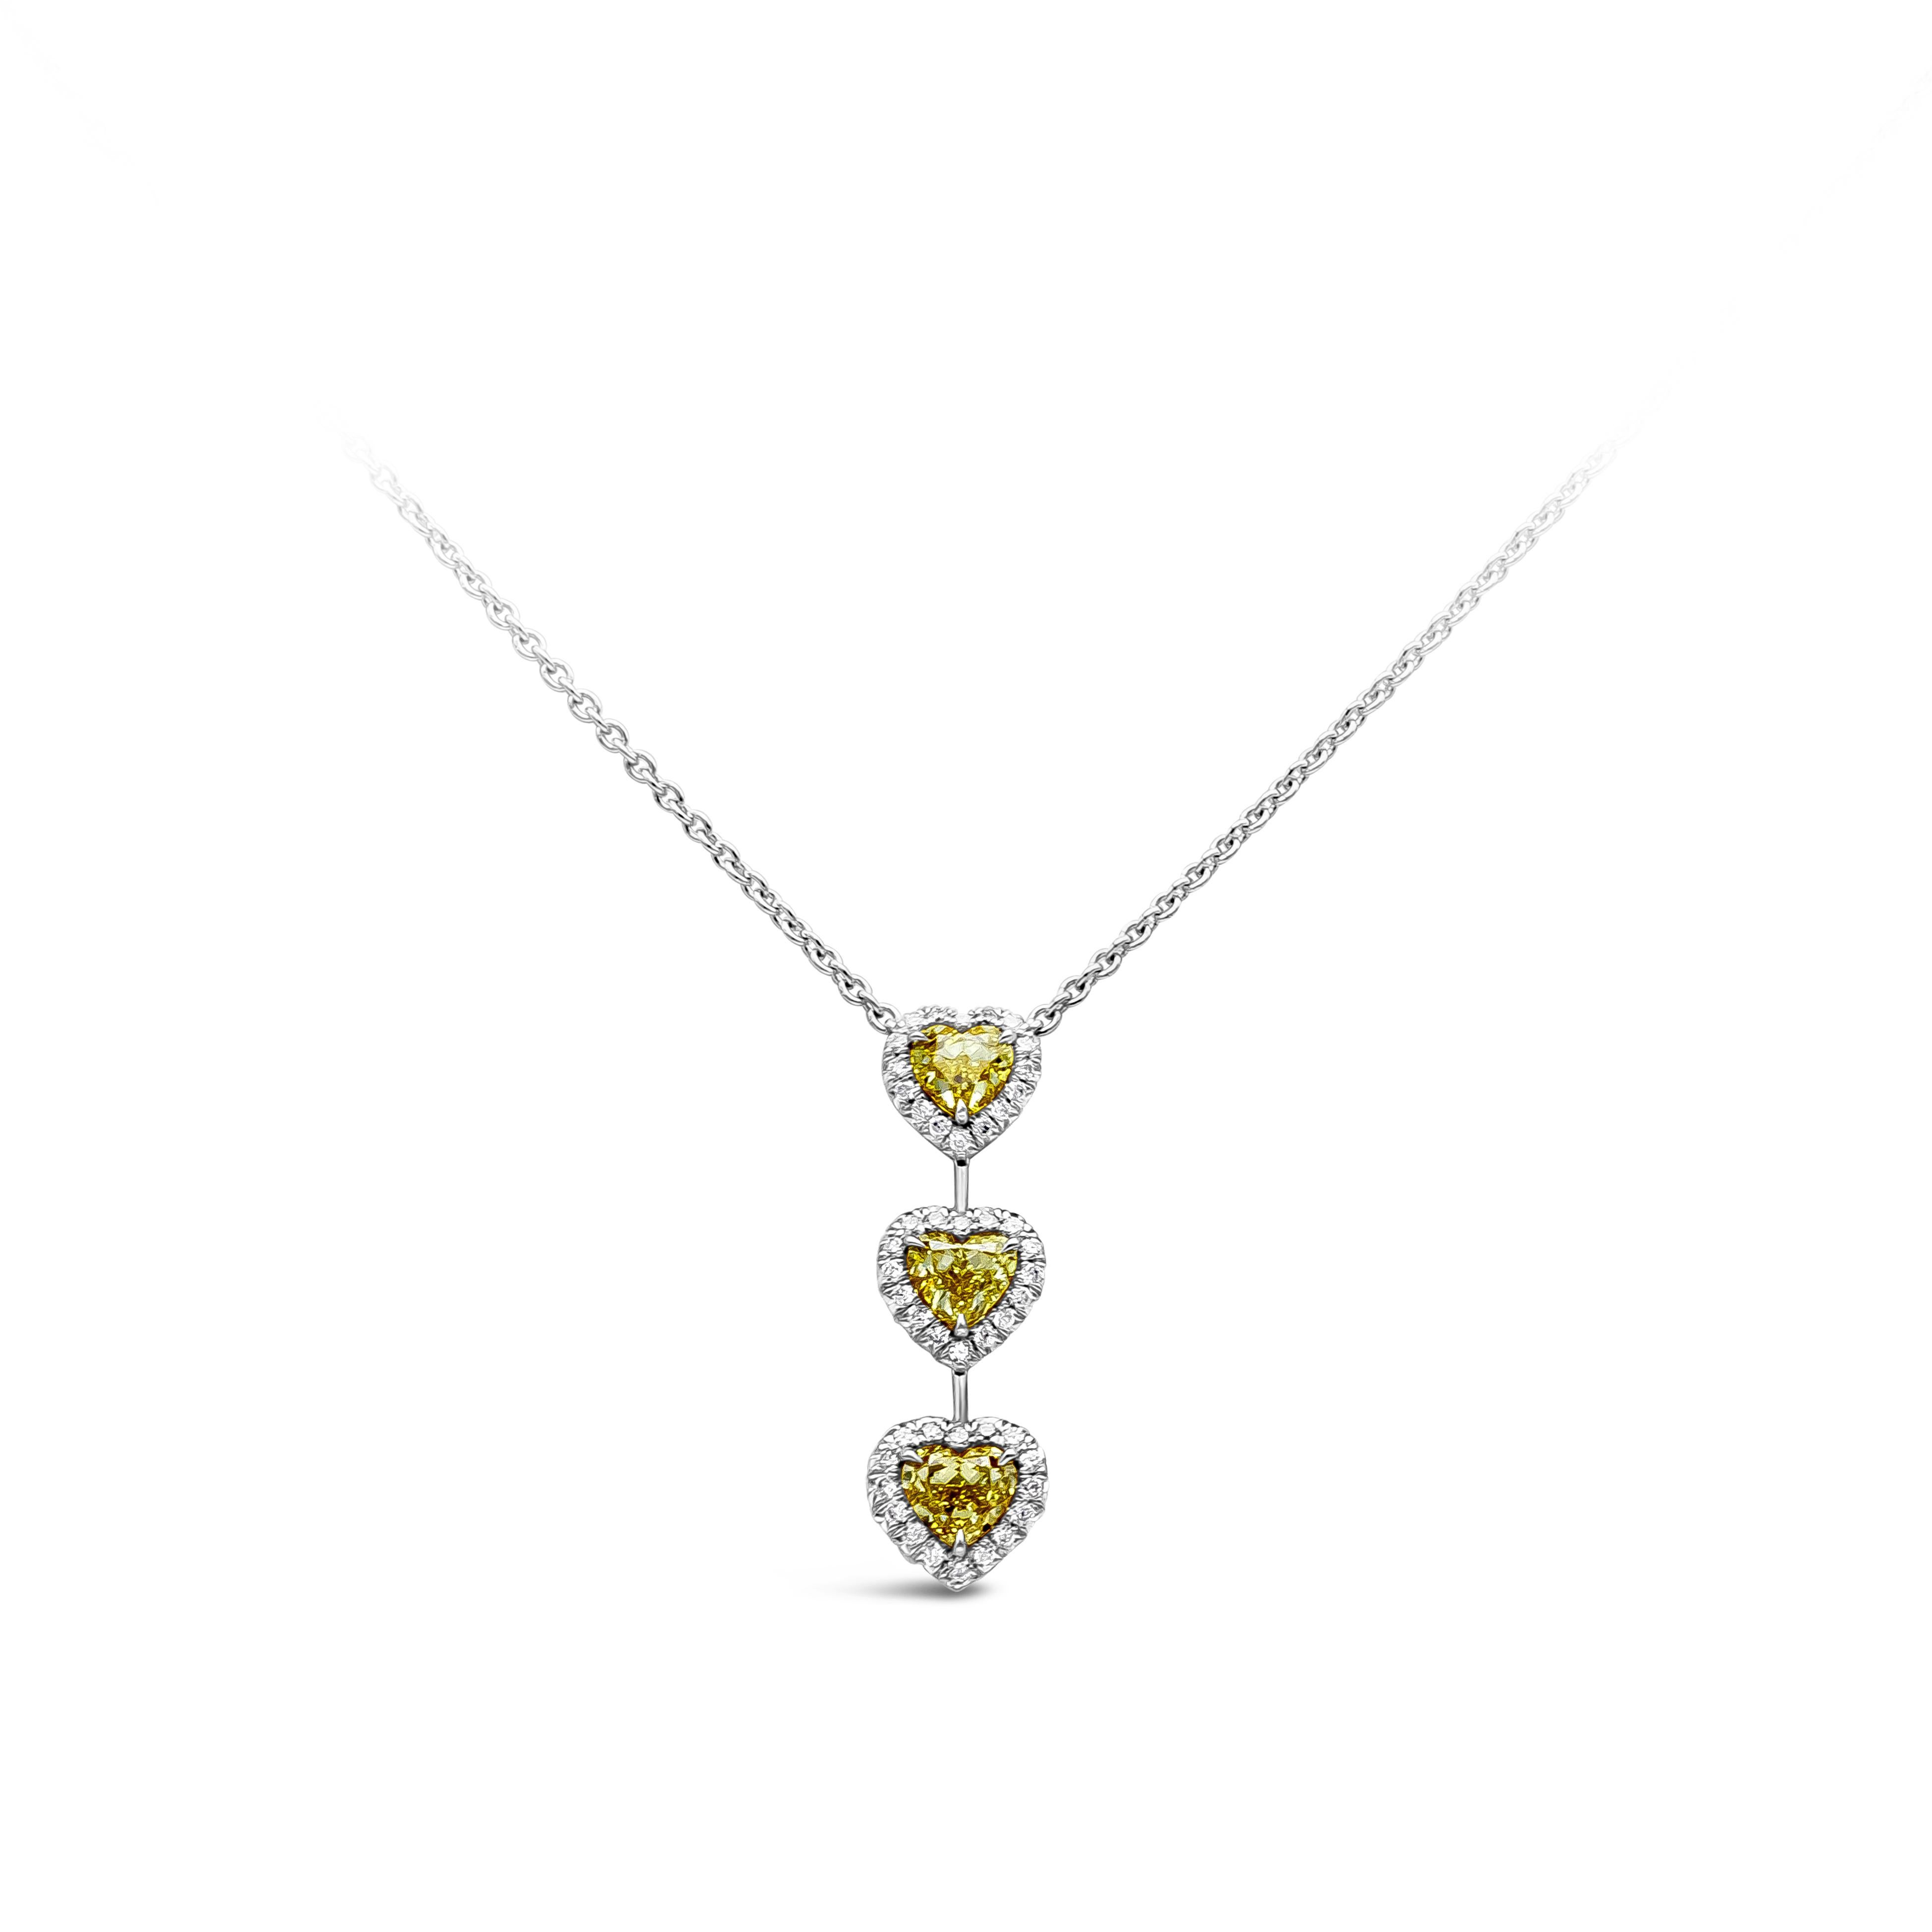 A simple but elegant diamond pendant necklace showcasing a row of three heart shape fancy intense yellow diamonds that elegantly drop on a platinum chain. Accented by 54 bright round diamonds weighing 0.33 carats total, F color and VS clarity. Fancy